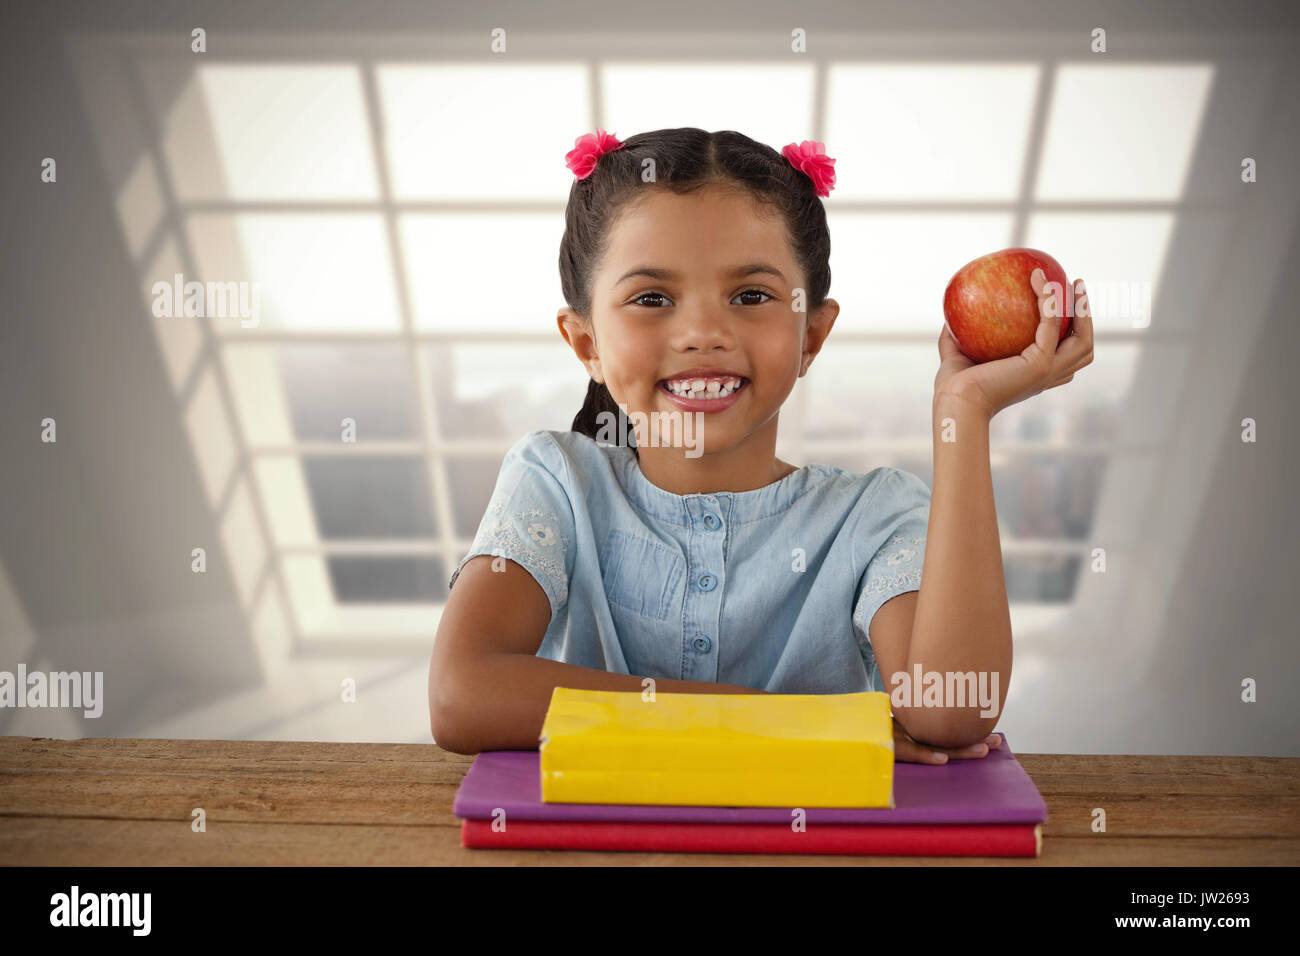 Smiling girl holding apple against room with large window showing city Stock Photo